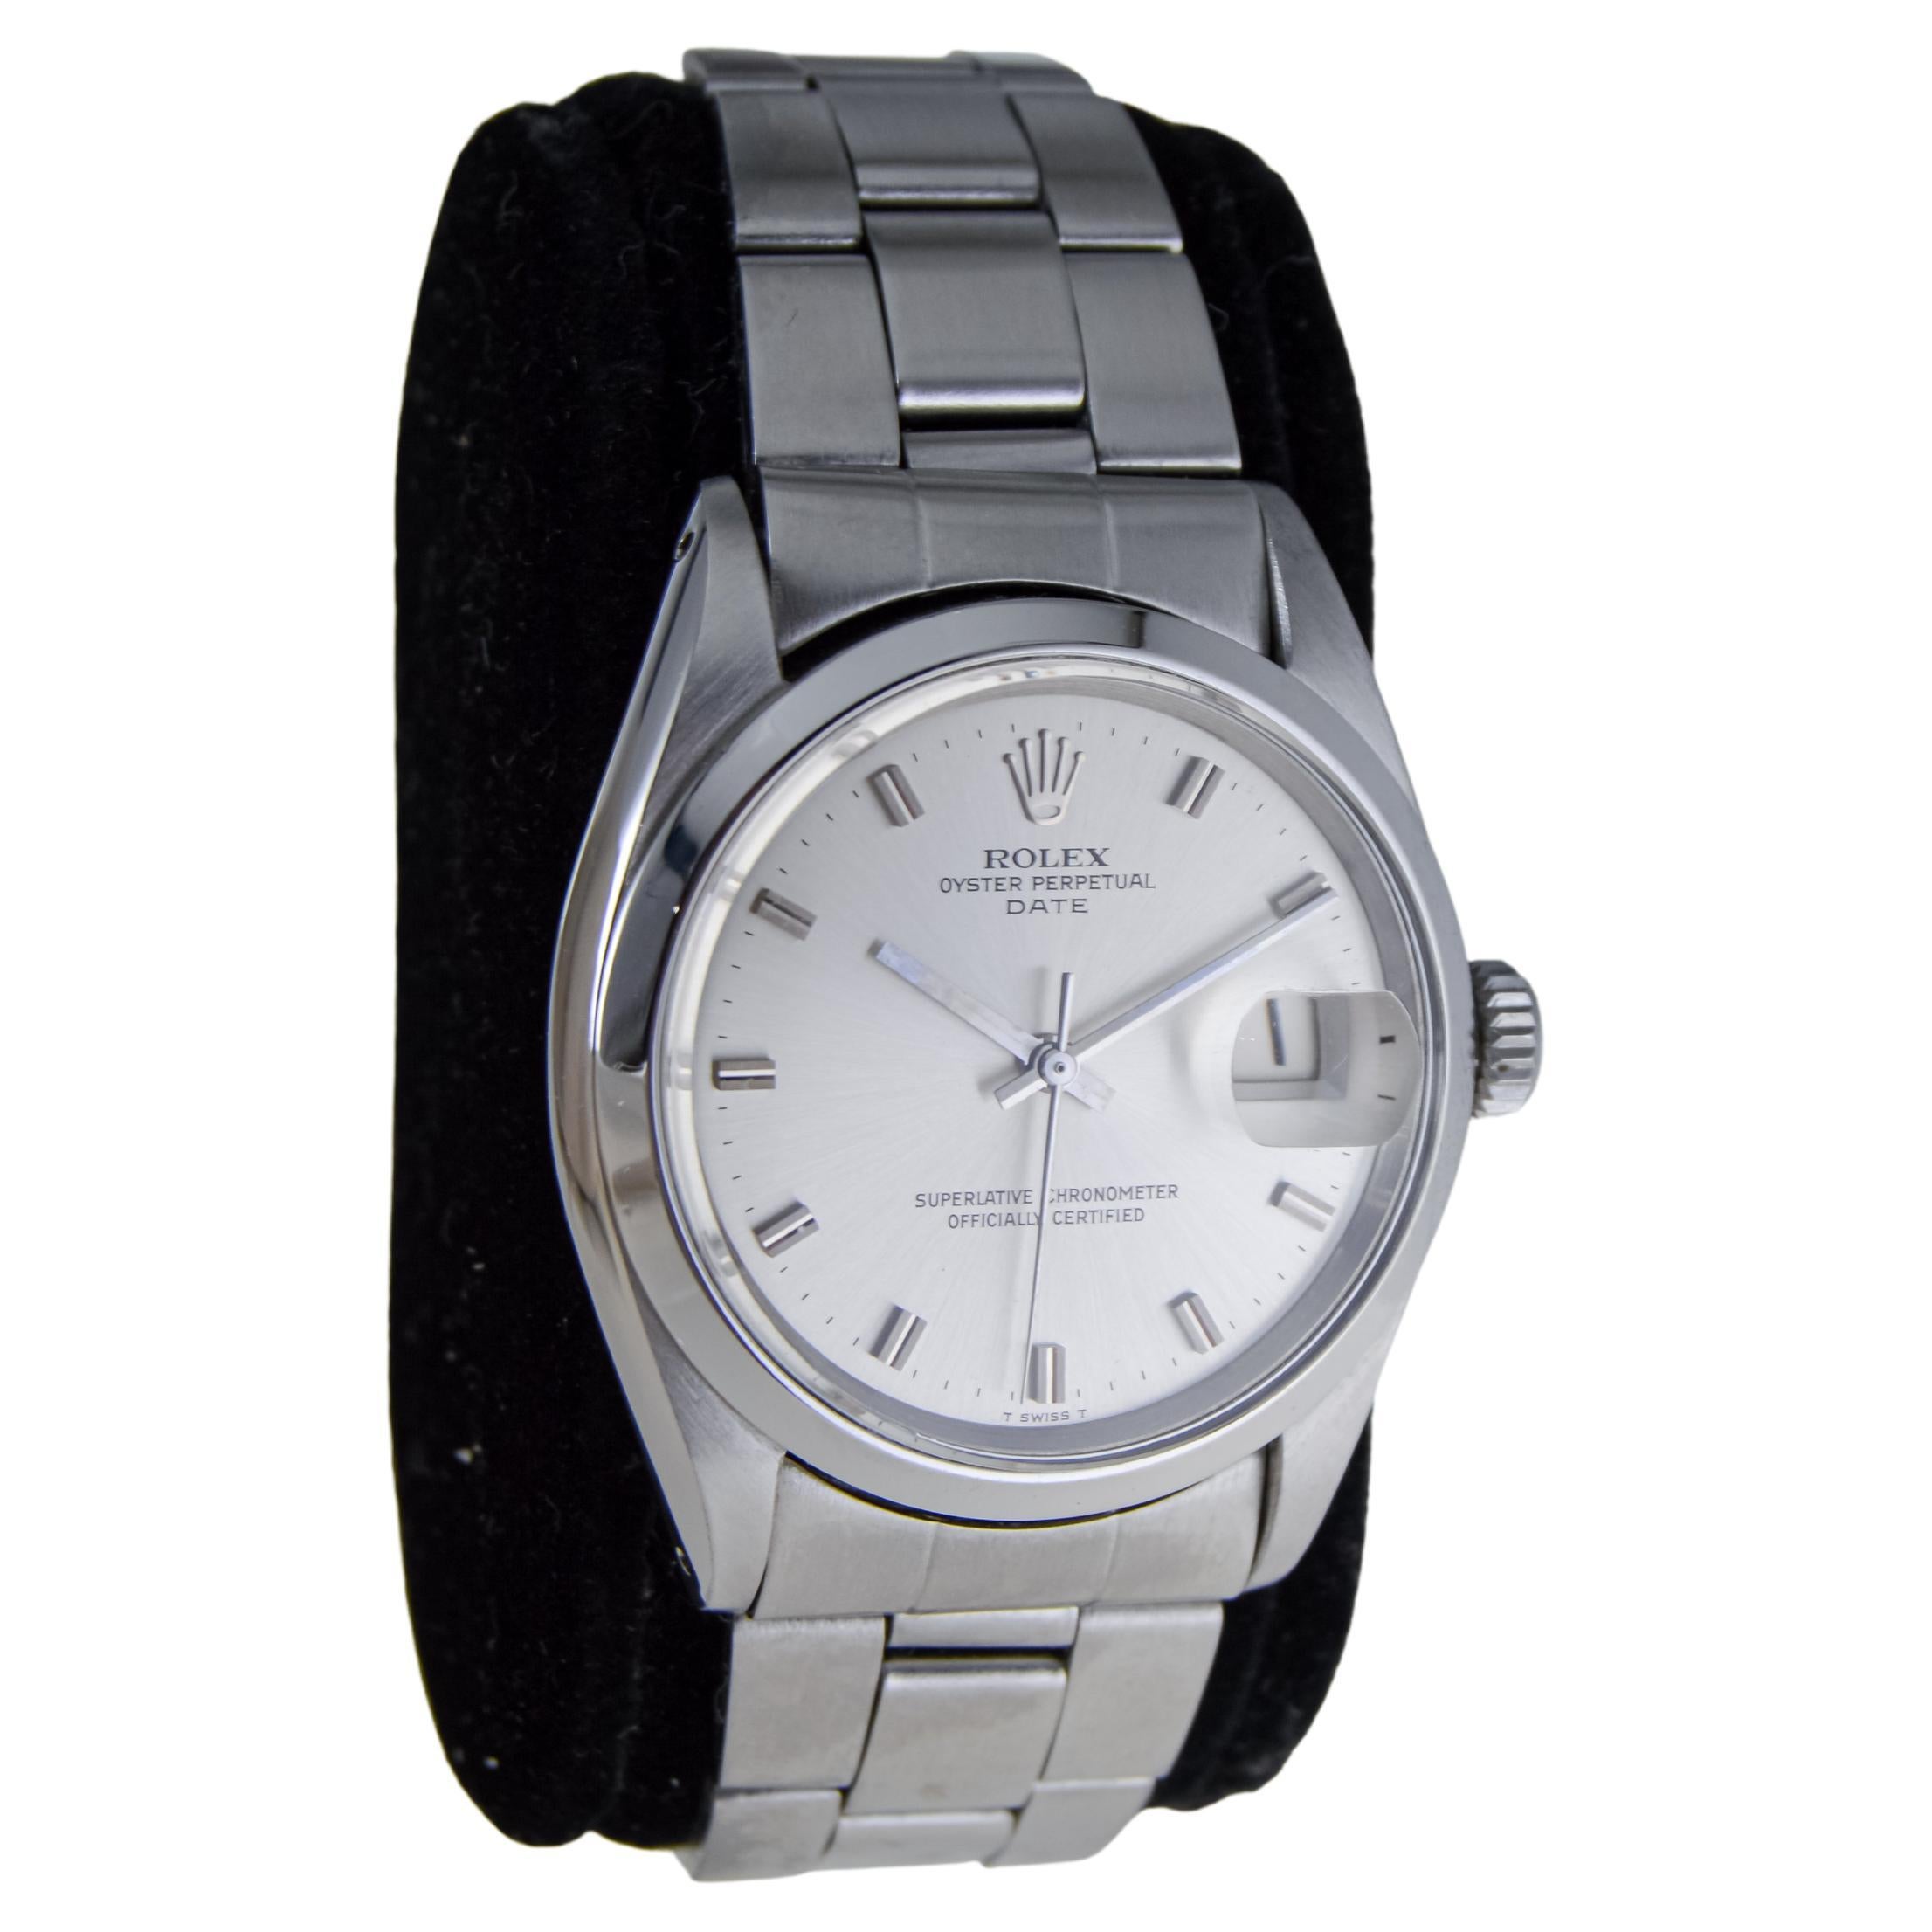 FACTORY / HOUSE: Rolex Watch Company
STYLE / REFERENCE: Oyster Perpetual Date / Reference 1500
METAL / MATERIAL: Stainless Steel
CIRCA / YEAR: 1960's
DIMENSIONS / SIZE: 40mm Length X 34mm Diameter 
MOVEMENT / CALIBER: Perpetual Winding / 26 Jewels /